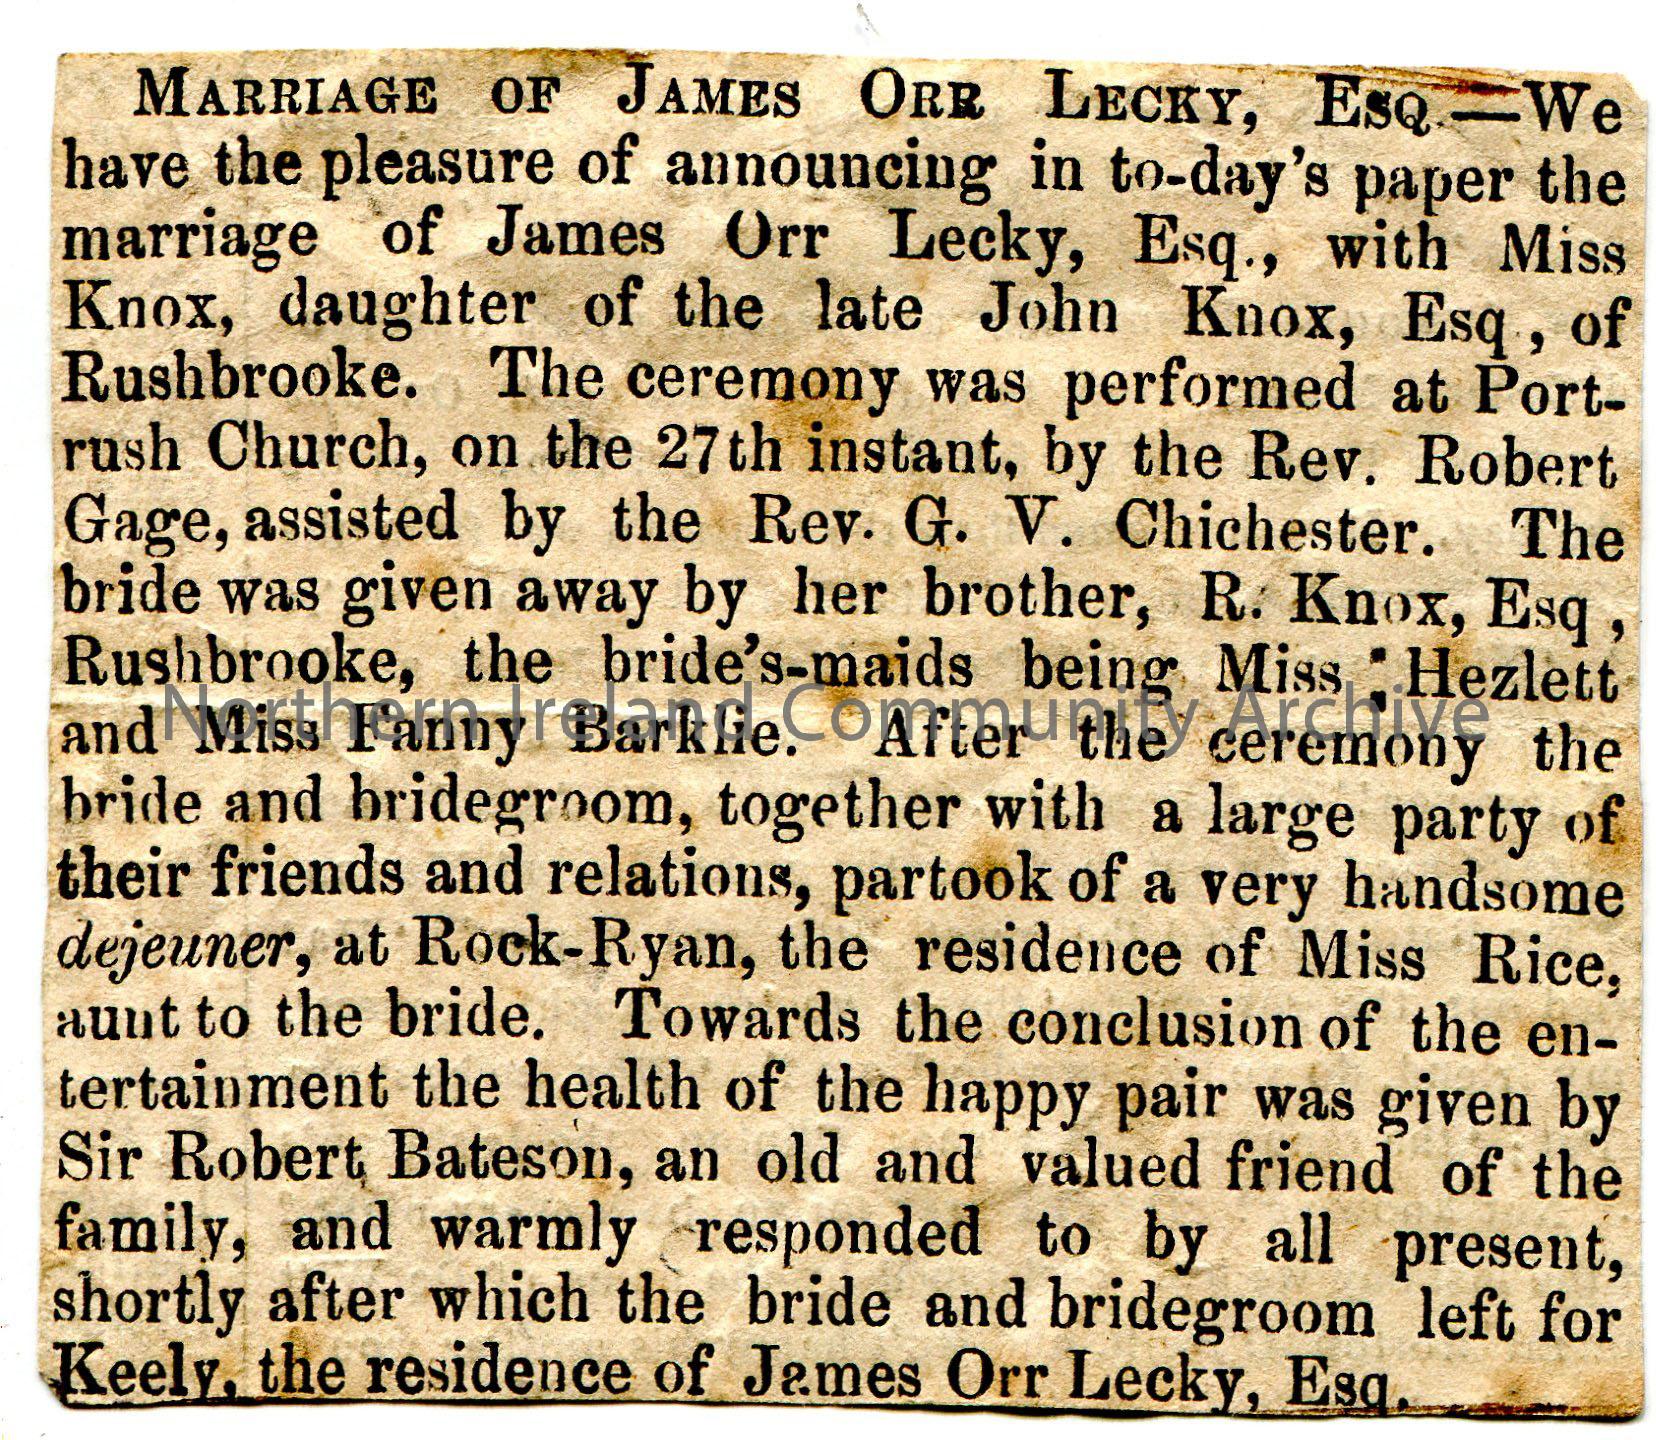 Article cut out from a newspaper re marriage of James Orr Lecky, Esq and Miss Knox, daughter of John Knox, Esq, Rushbrooke. Ceremony was held at Portr…